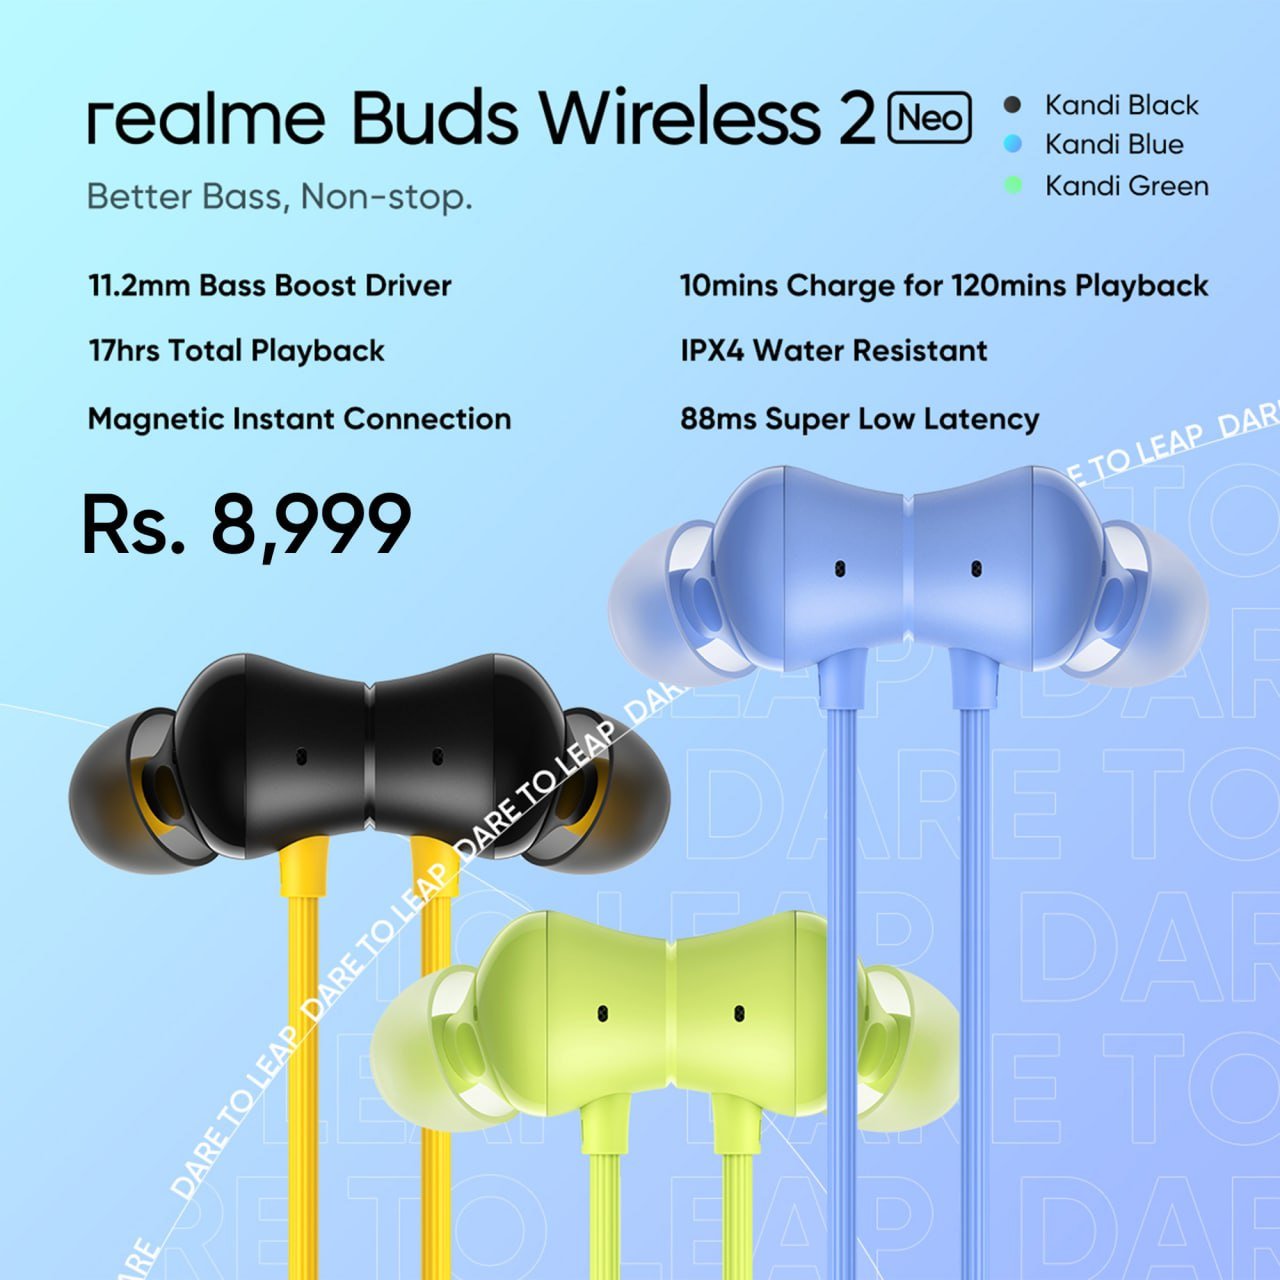 Realme Launched New Wearables In India